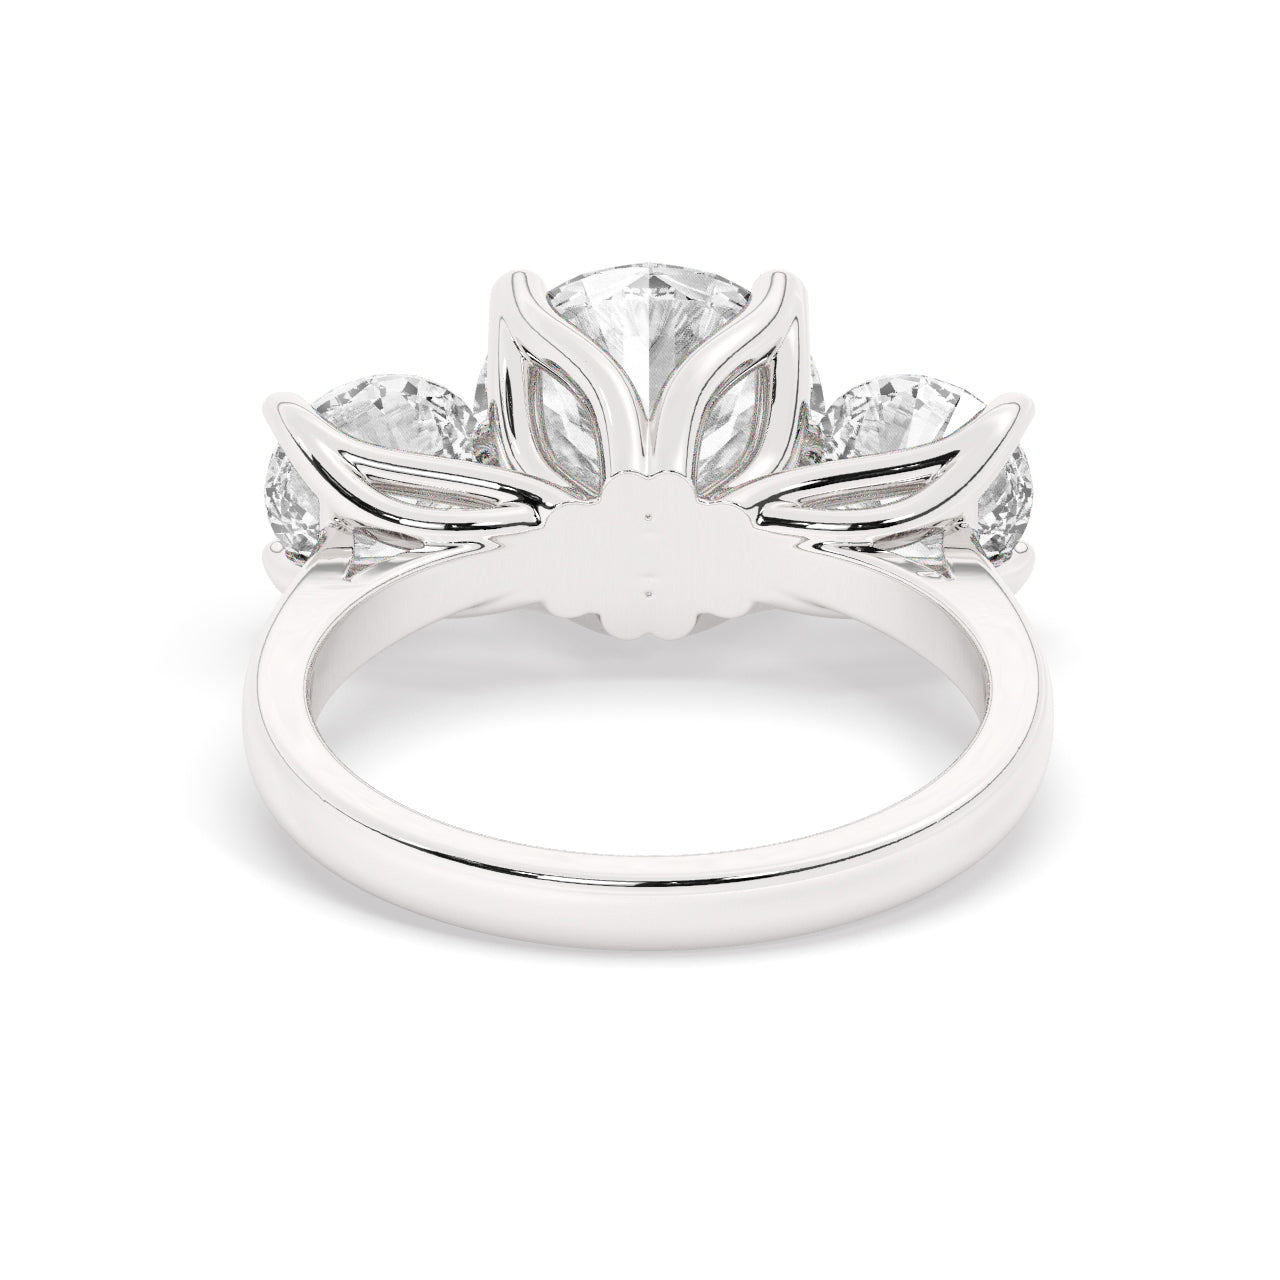 White Gold Trinity Engagement Ring - Back View